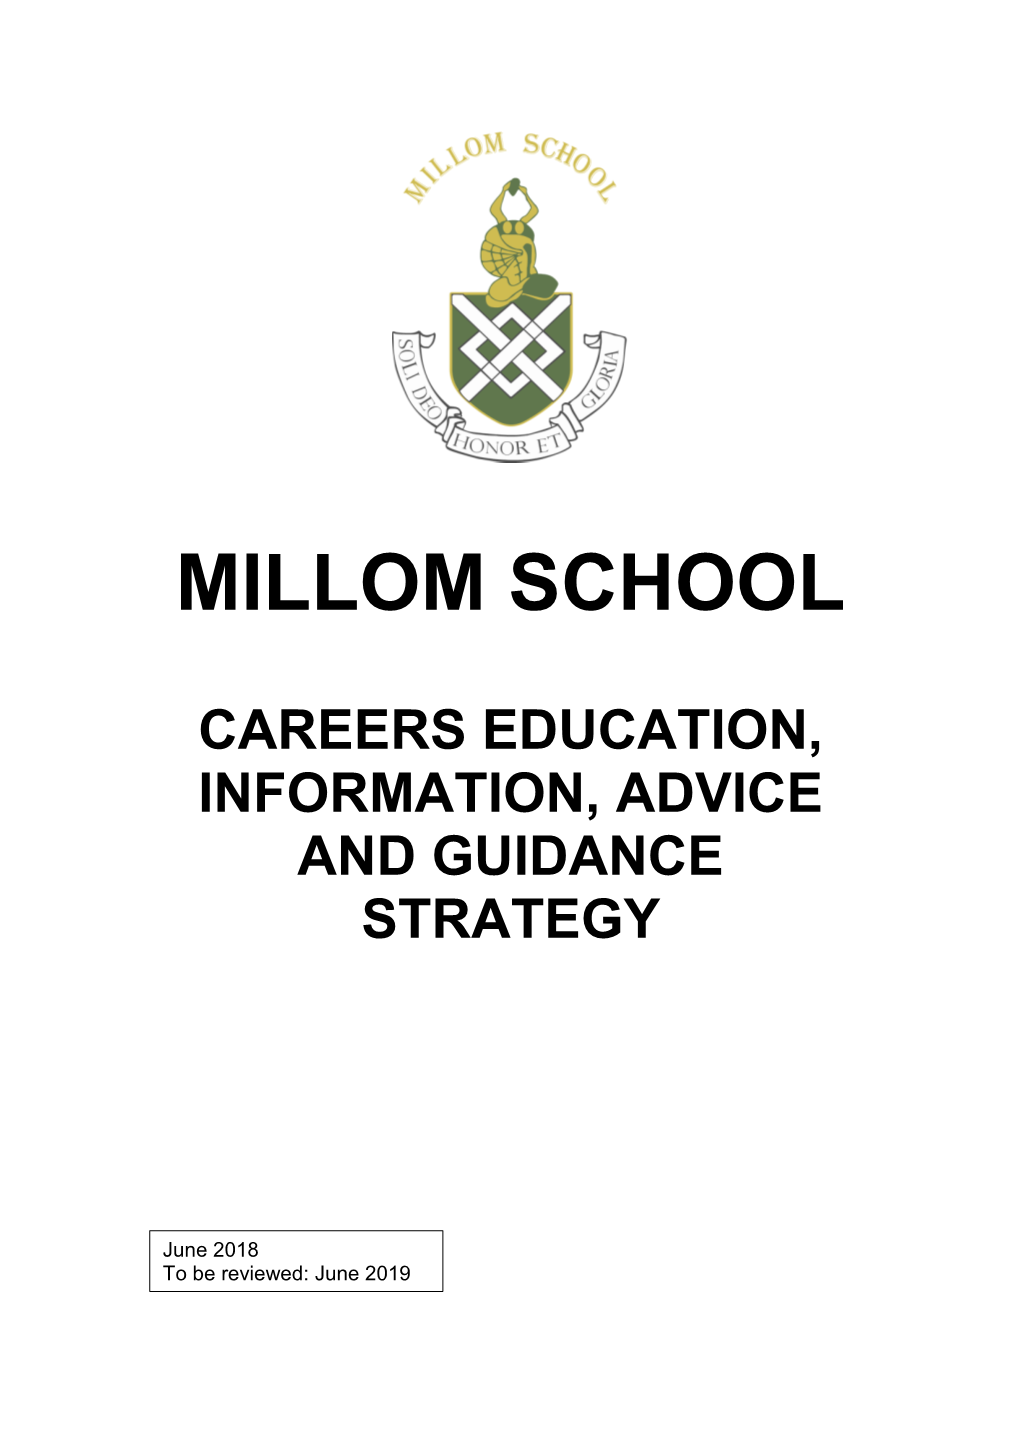 Millom School Careers Education, Information, Advice and Guidance